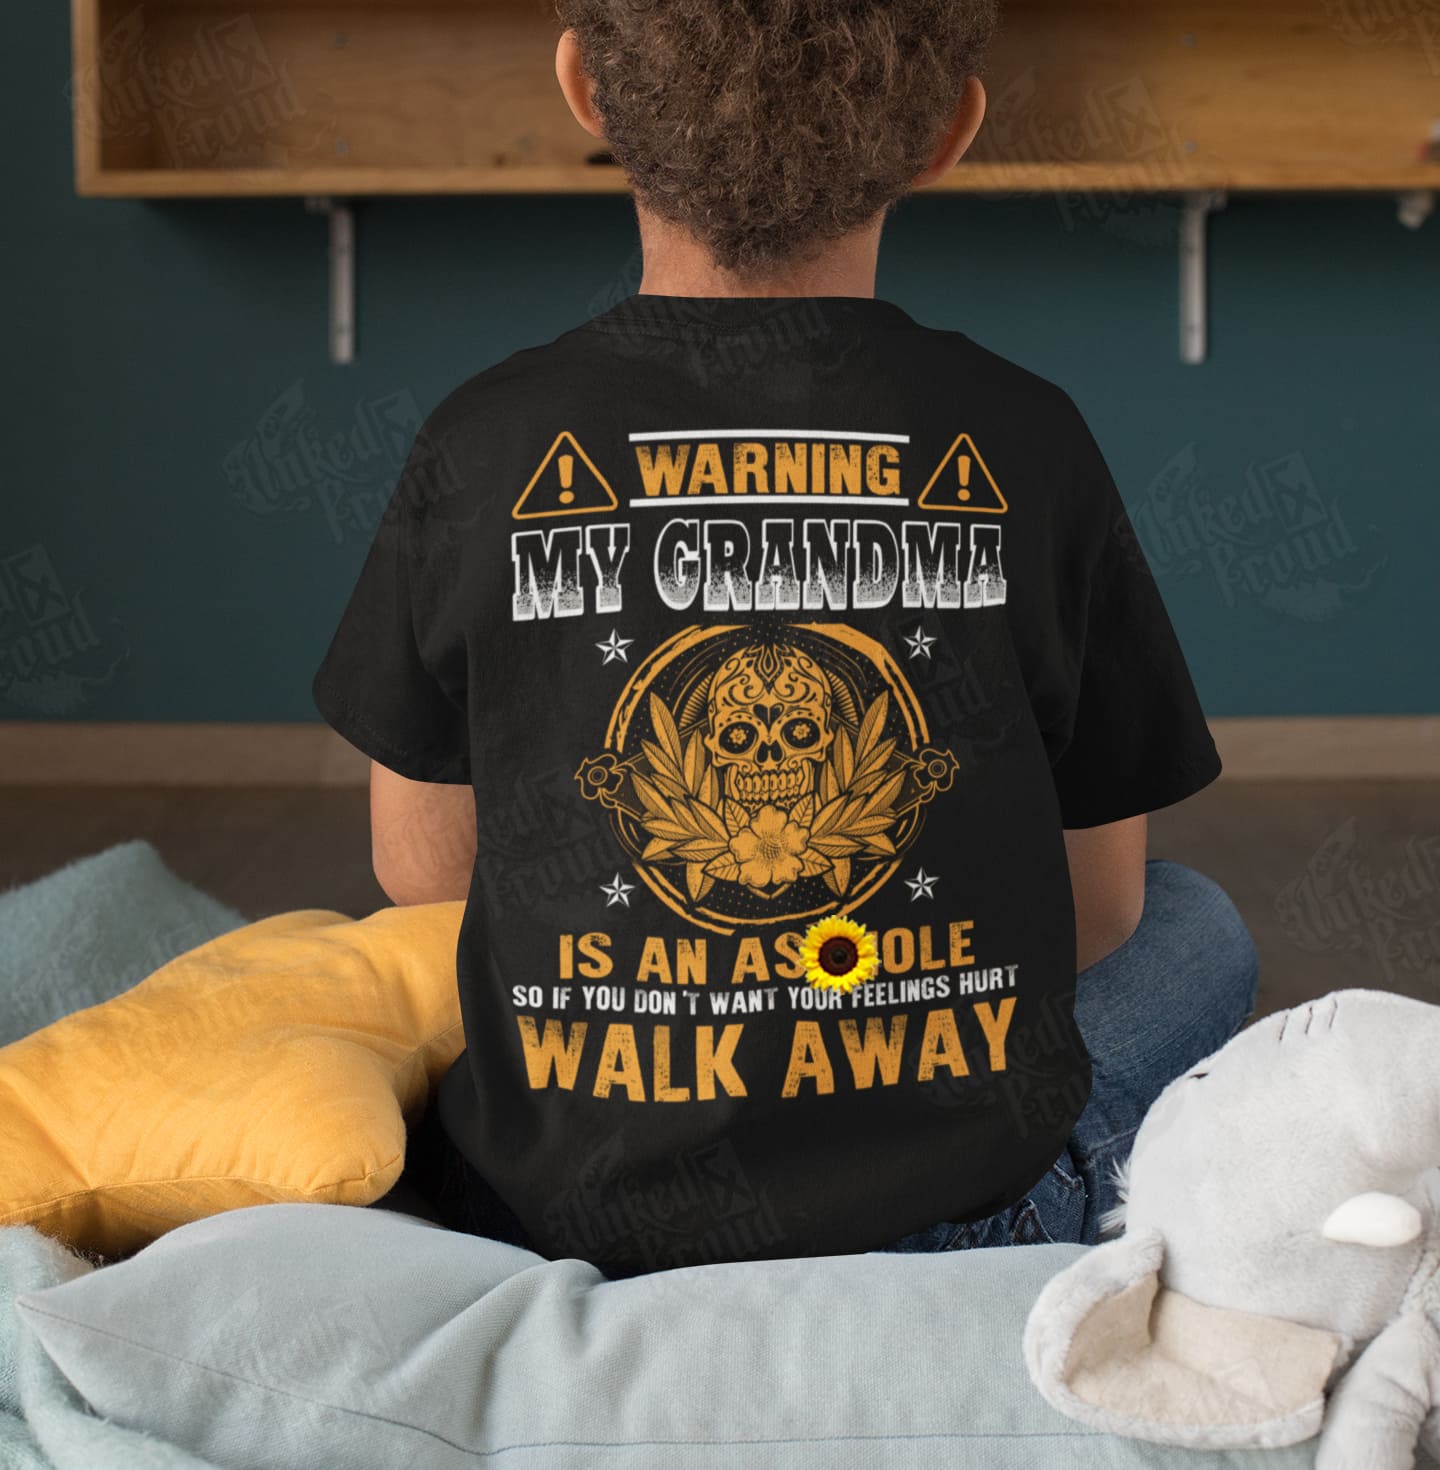 My grandma is an asshole so if you don't want your feelings hurts walk away - Gift for grandma, family T-shirt